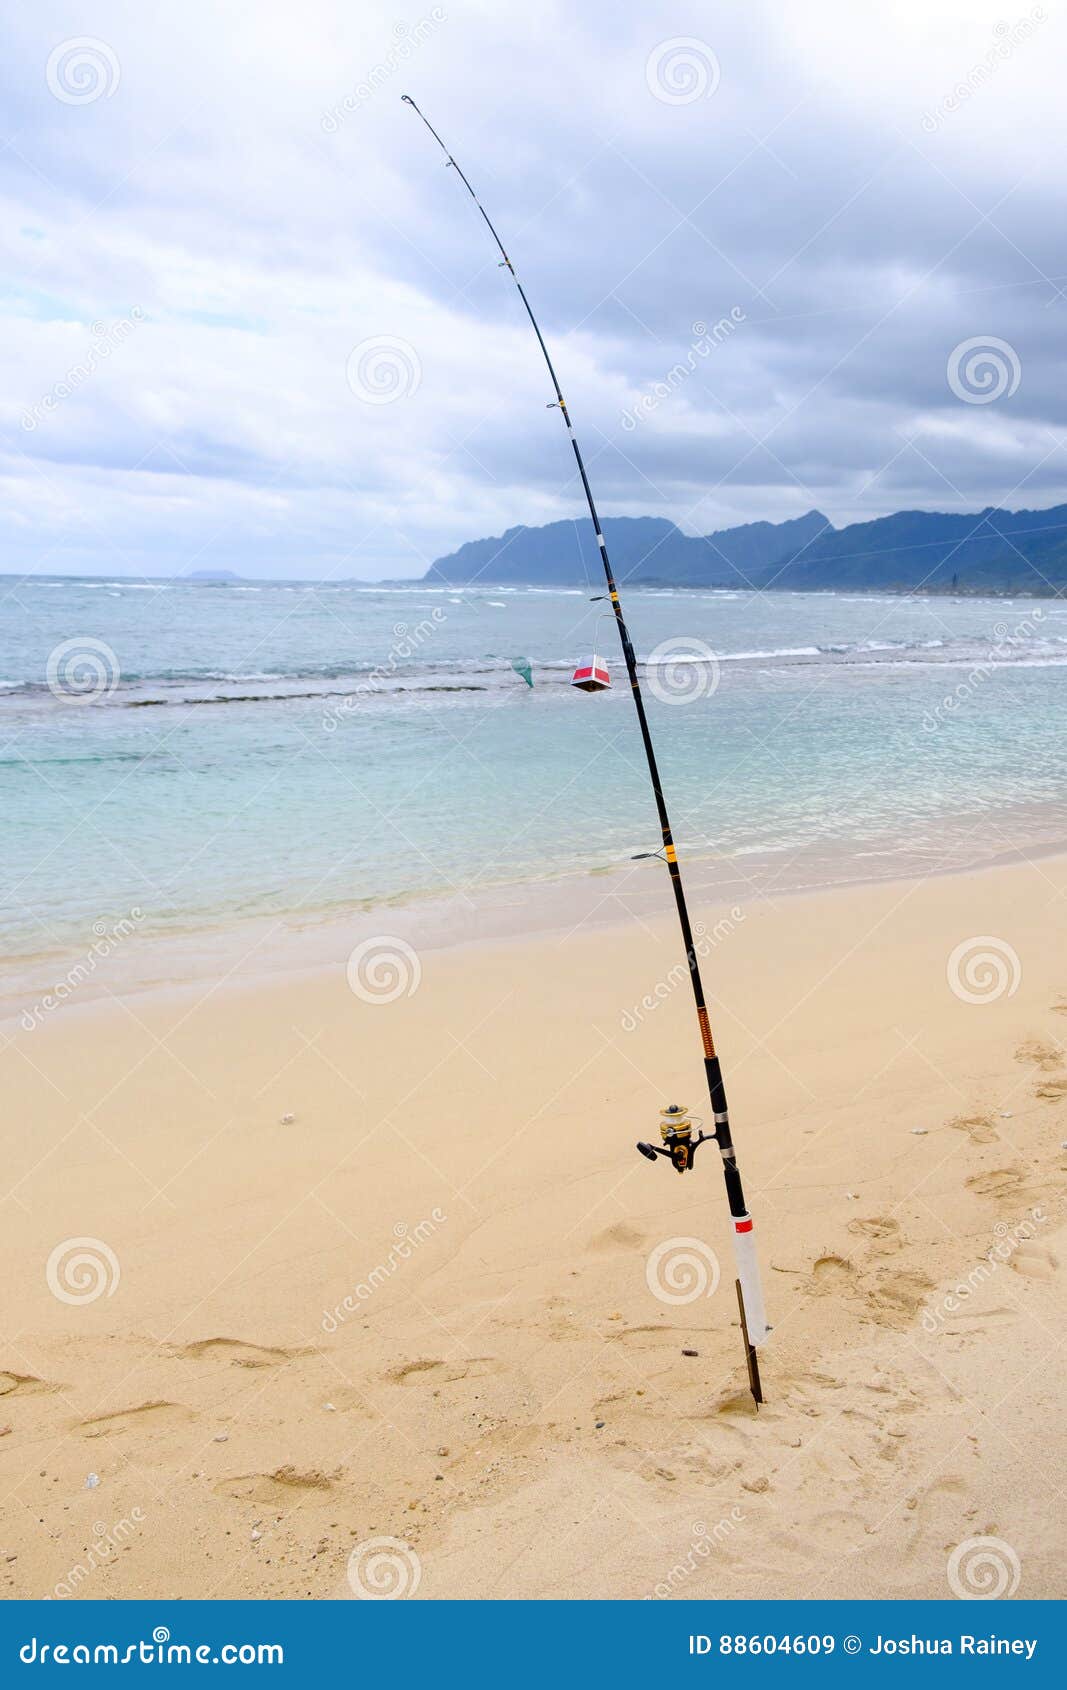 Saltwater Fishing Pole and Ocean Stock Image - Image of fisherman, sports:  88604609